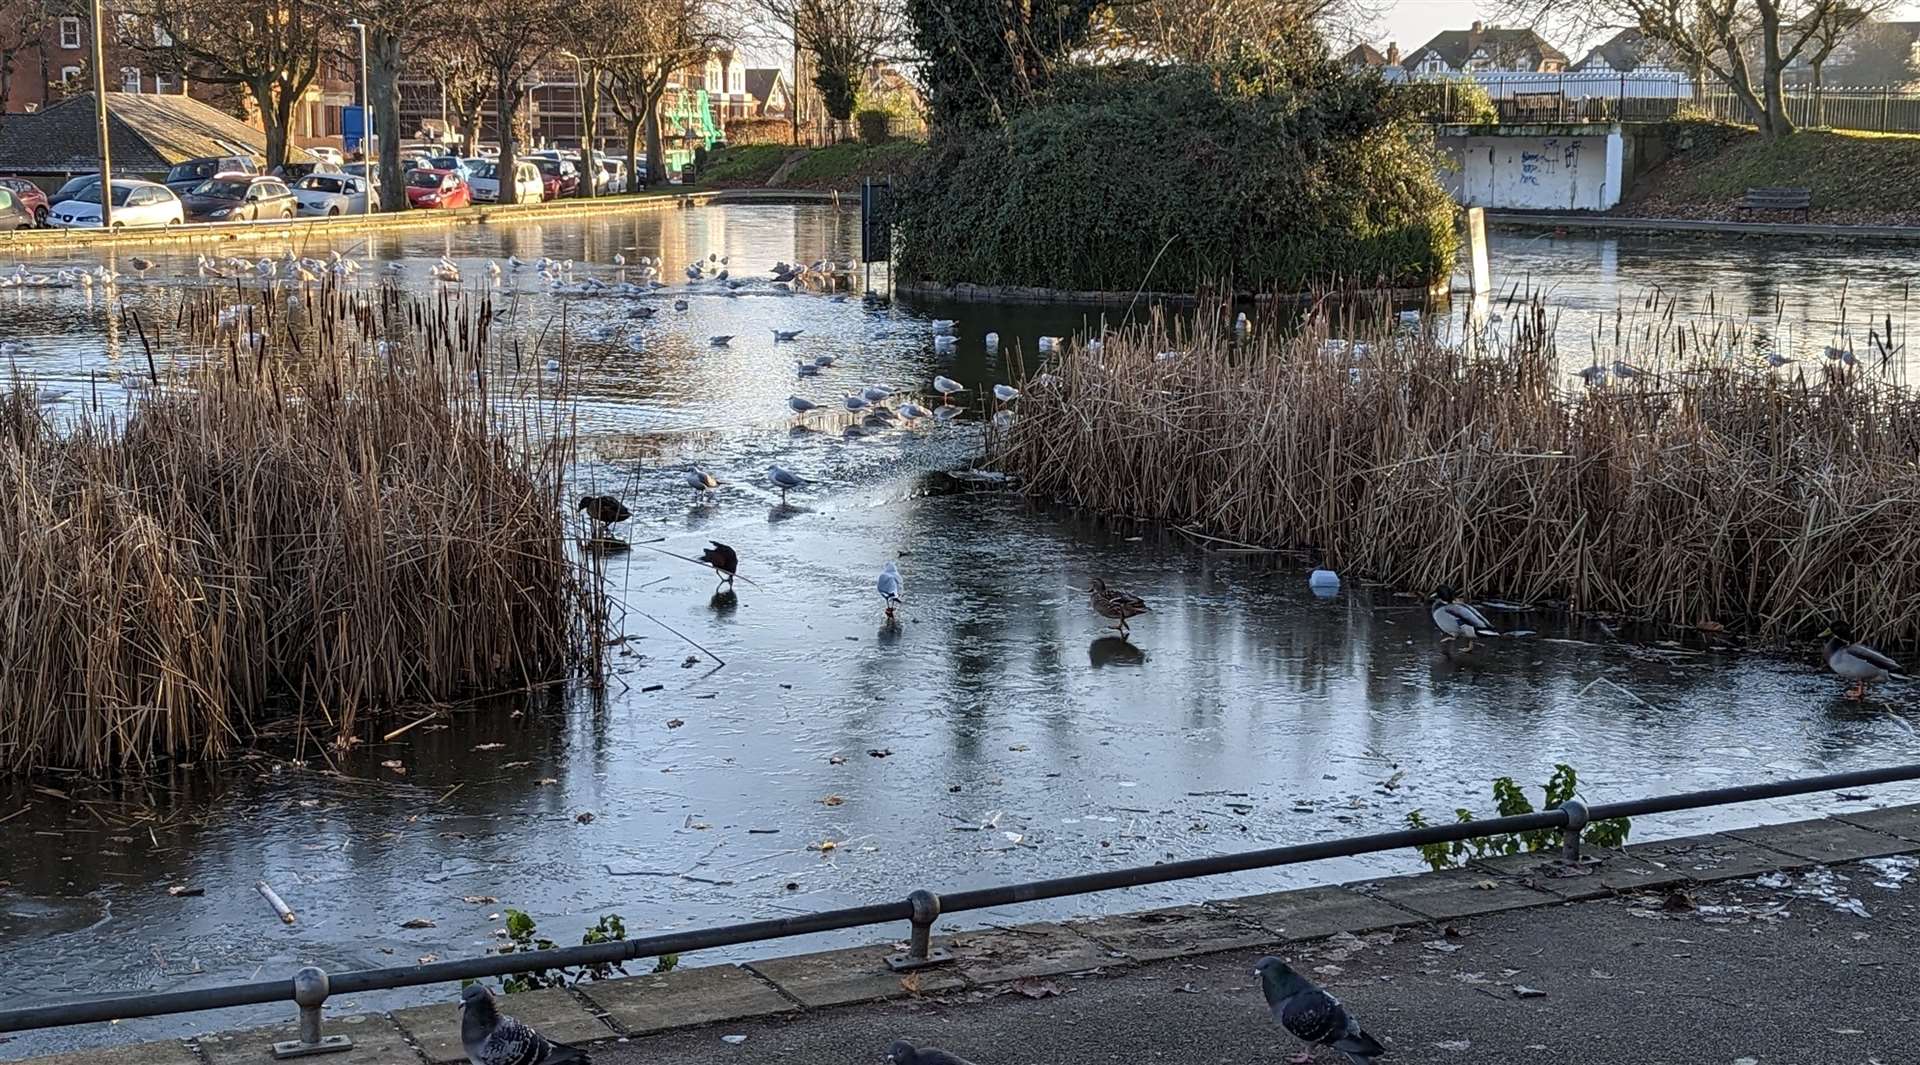 The upper pond at Radnor Park in Folkestone where the children were trying to stand on the thin ice